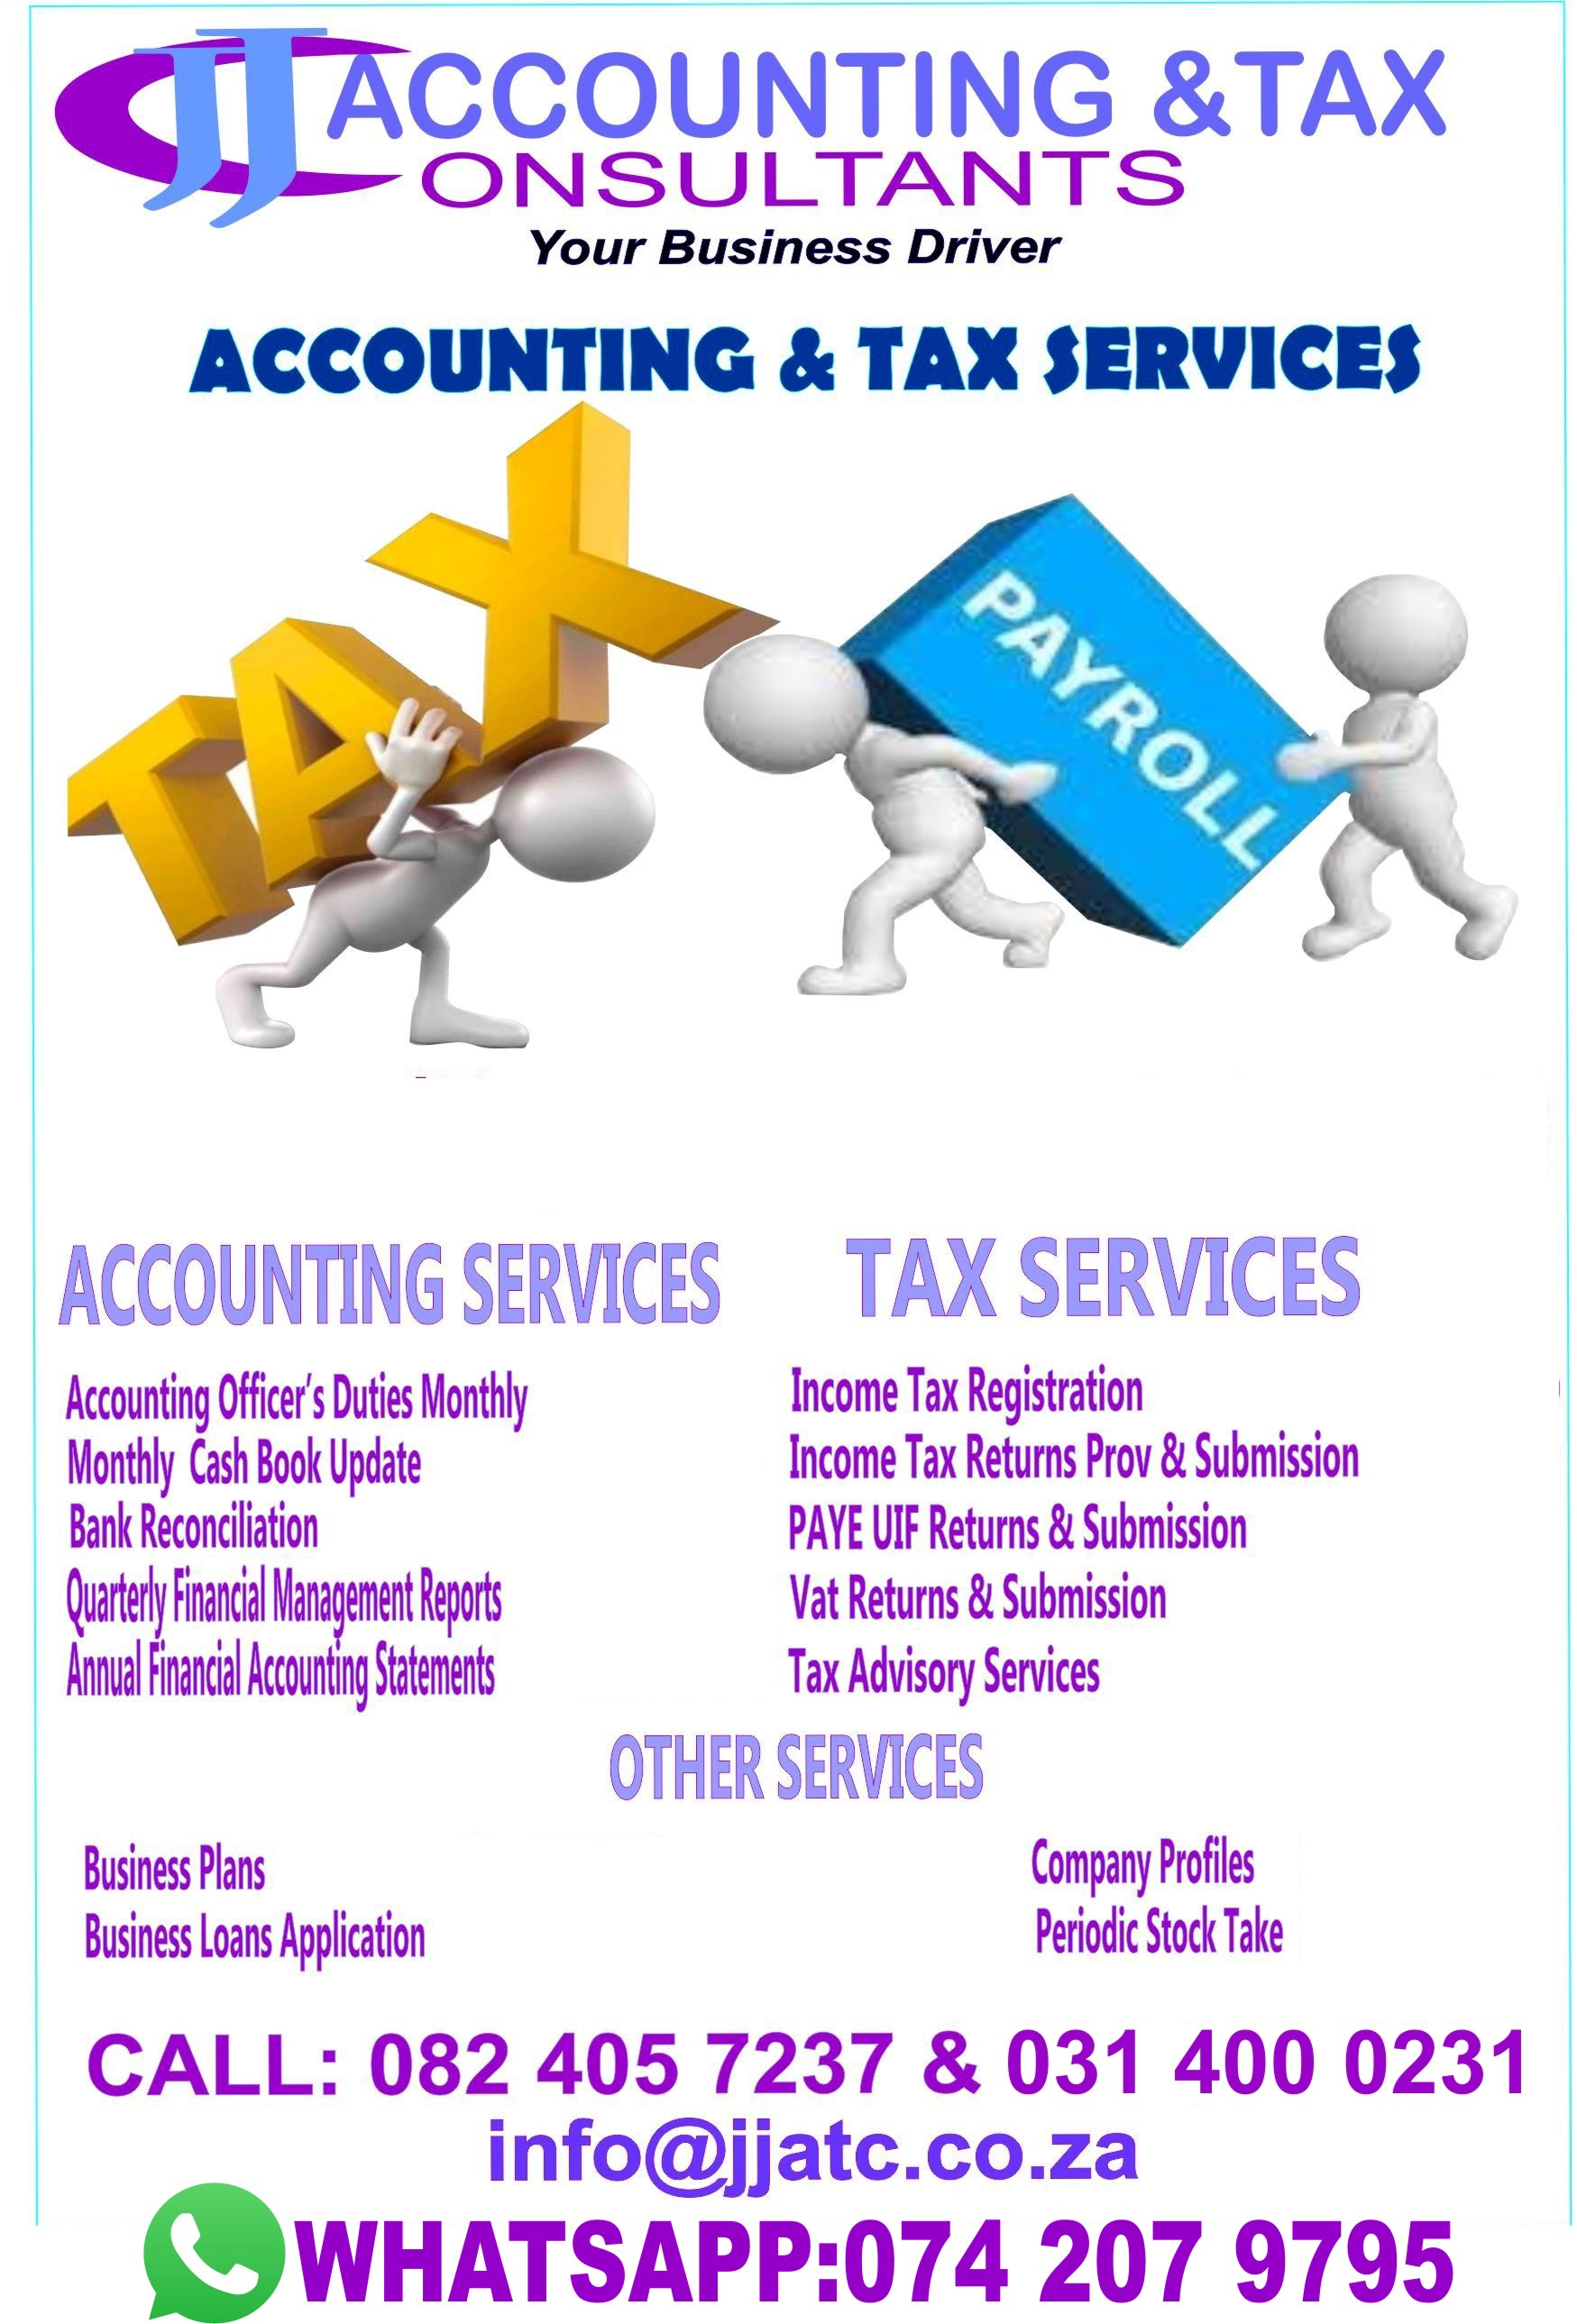 ACCOUNTING & TAX SERVICES